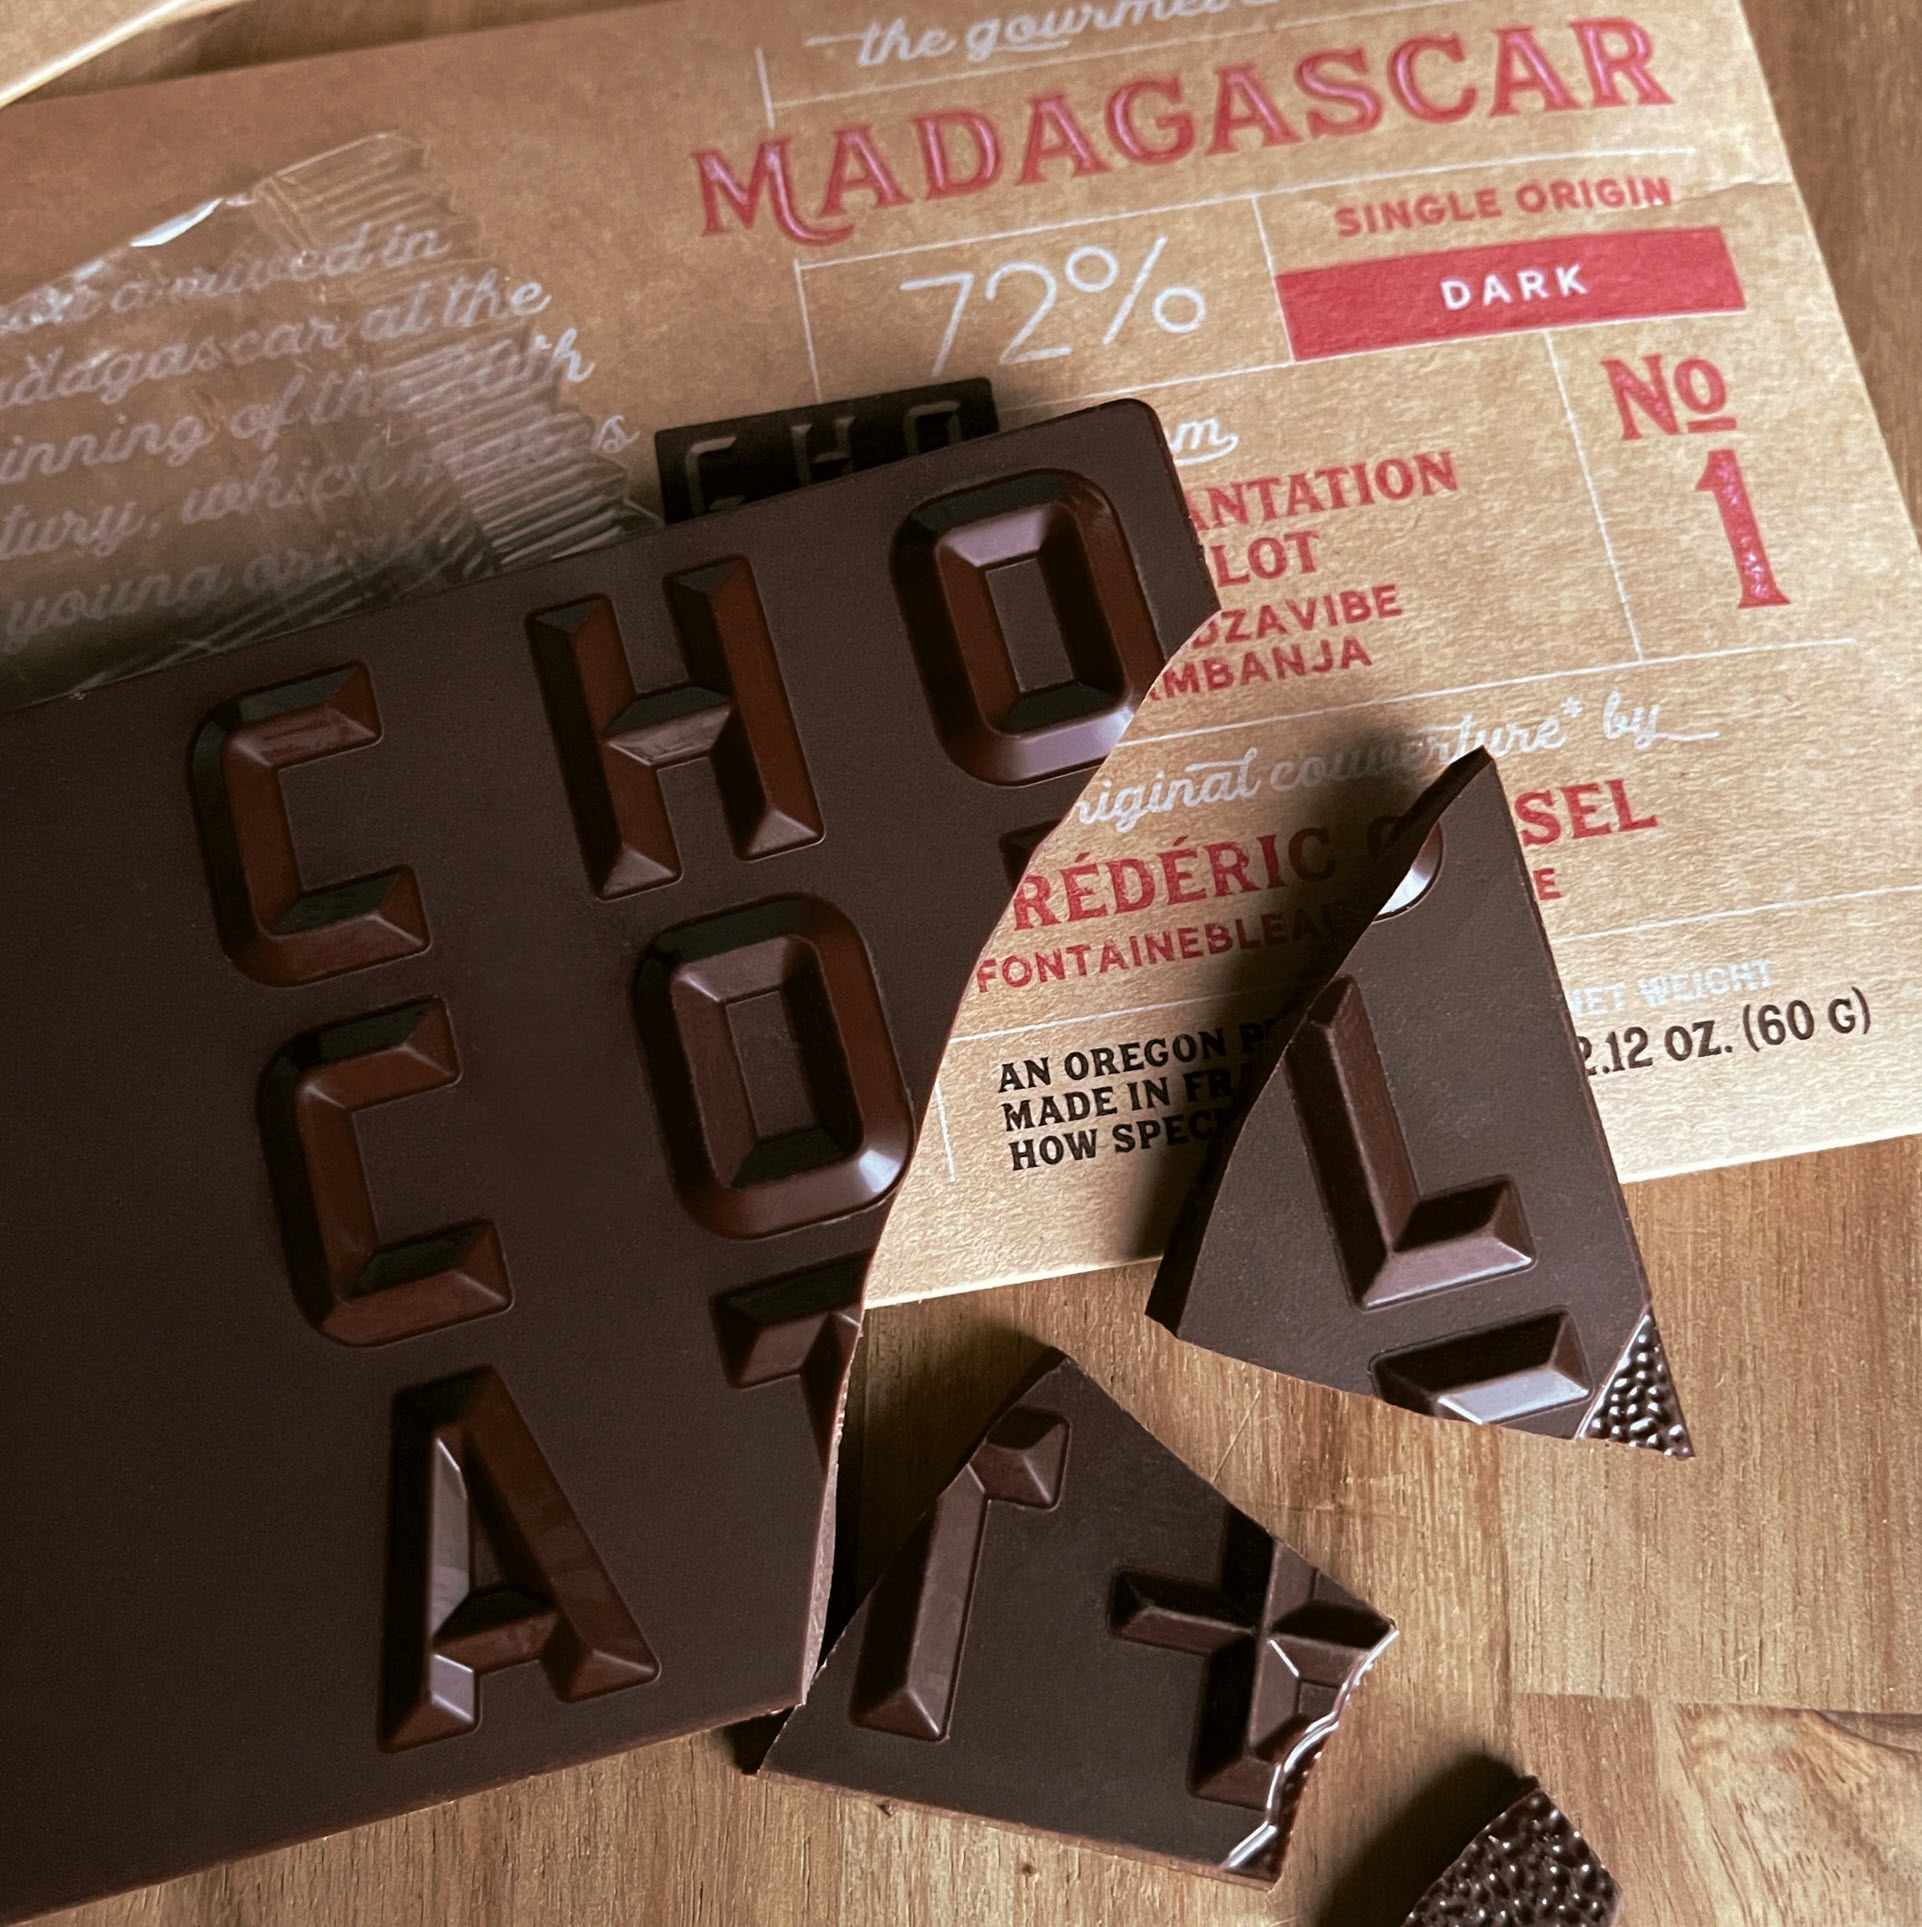 Chocolat-e Inc. Launches Its Gourmet Chocolate on the American Market and Enhances the Tasting Experience